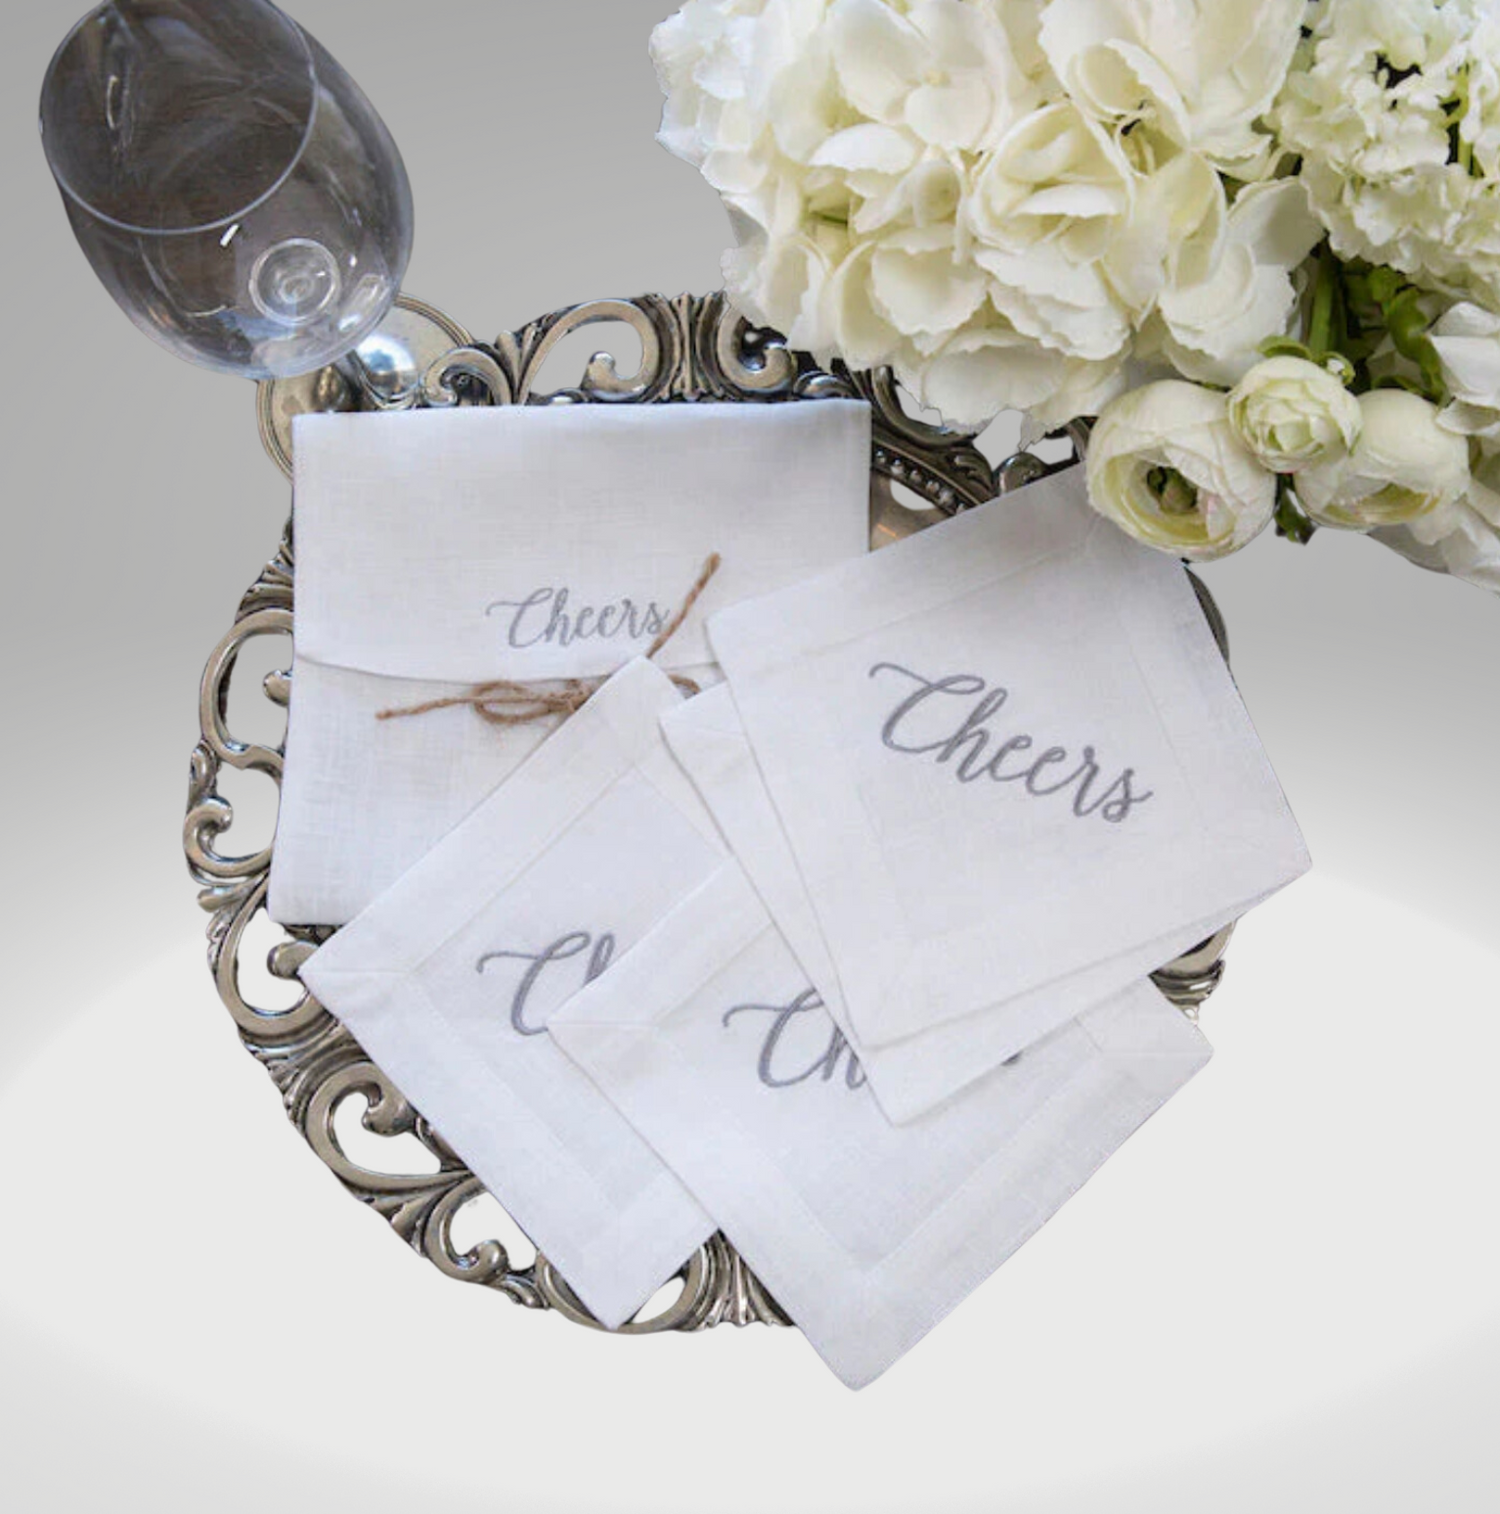 Crown Linen Cheers European Embroidered cocktail napkin set of 4